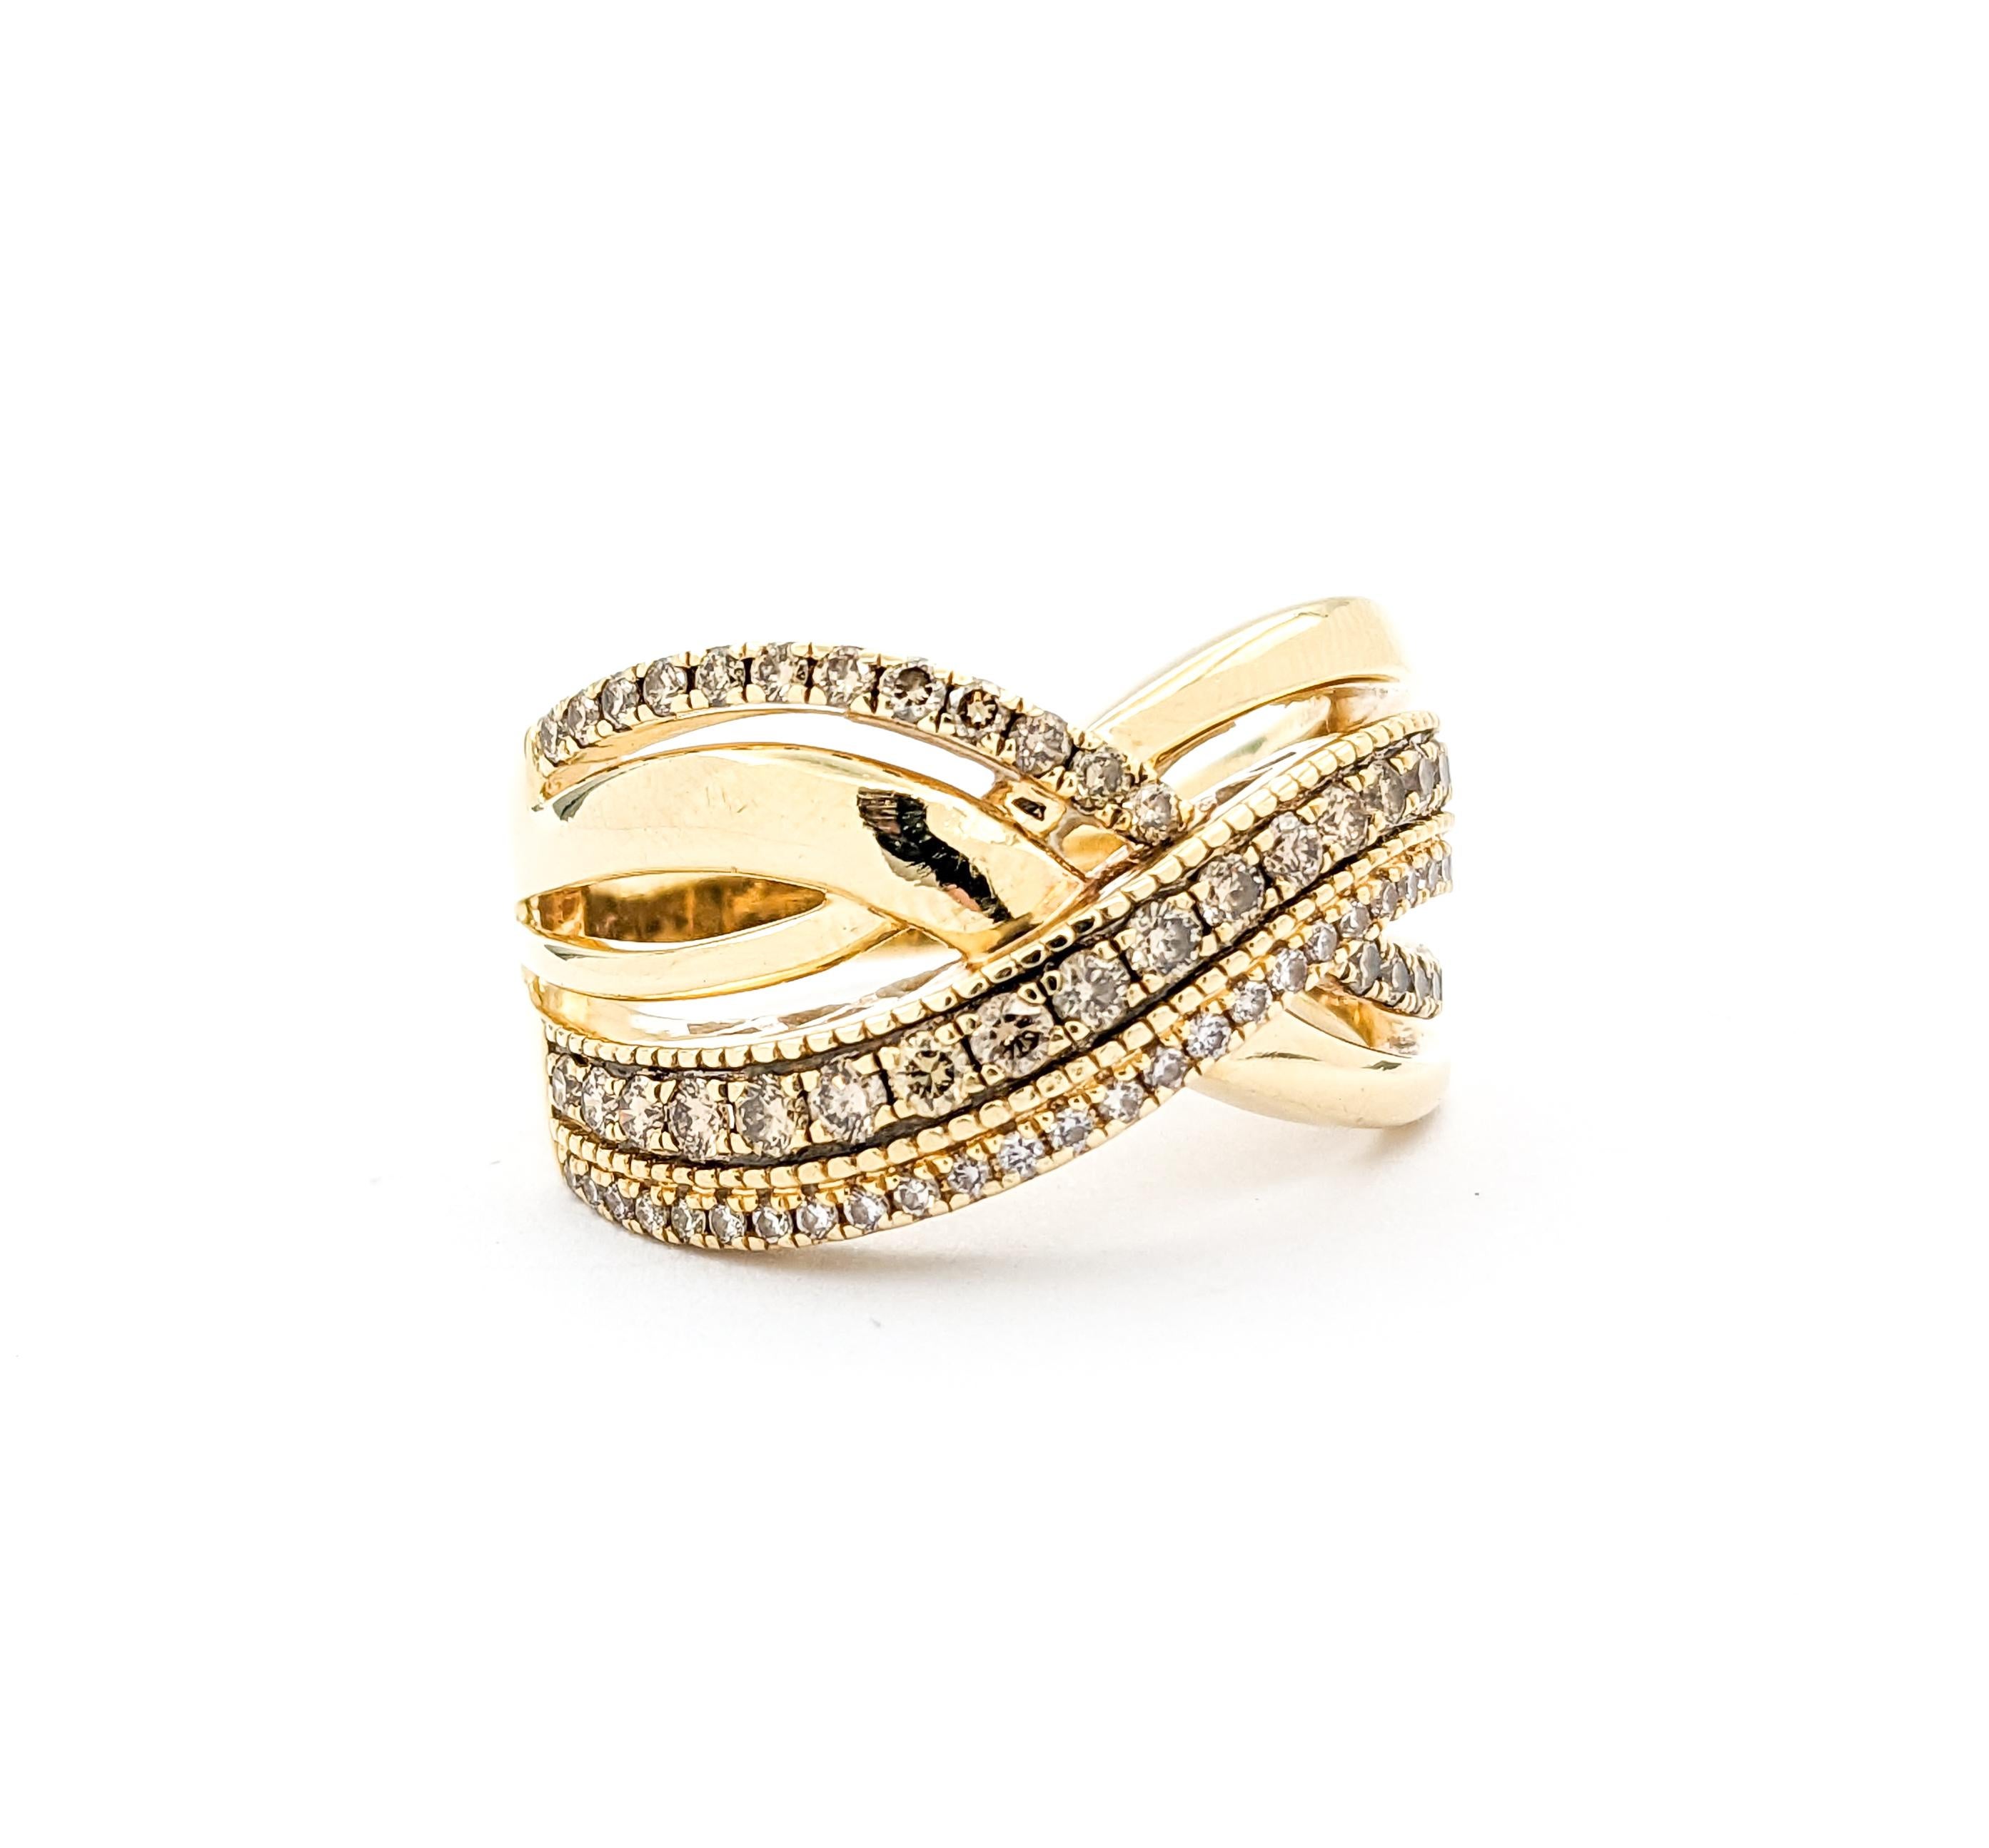 1ctw Diamond Ring In Yellow Gold For Sale 2